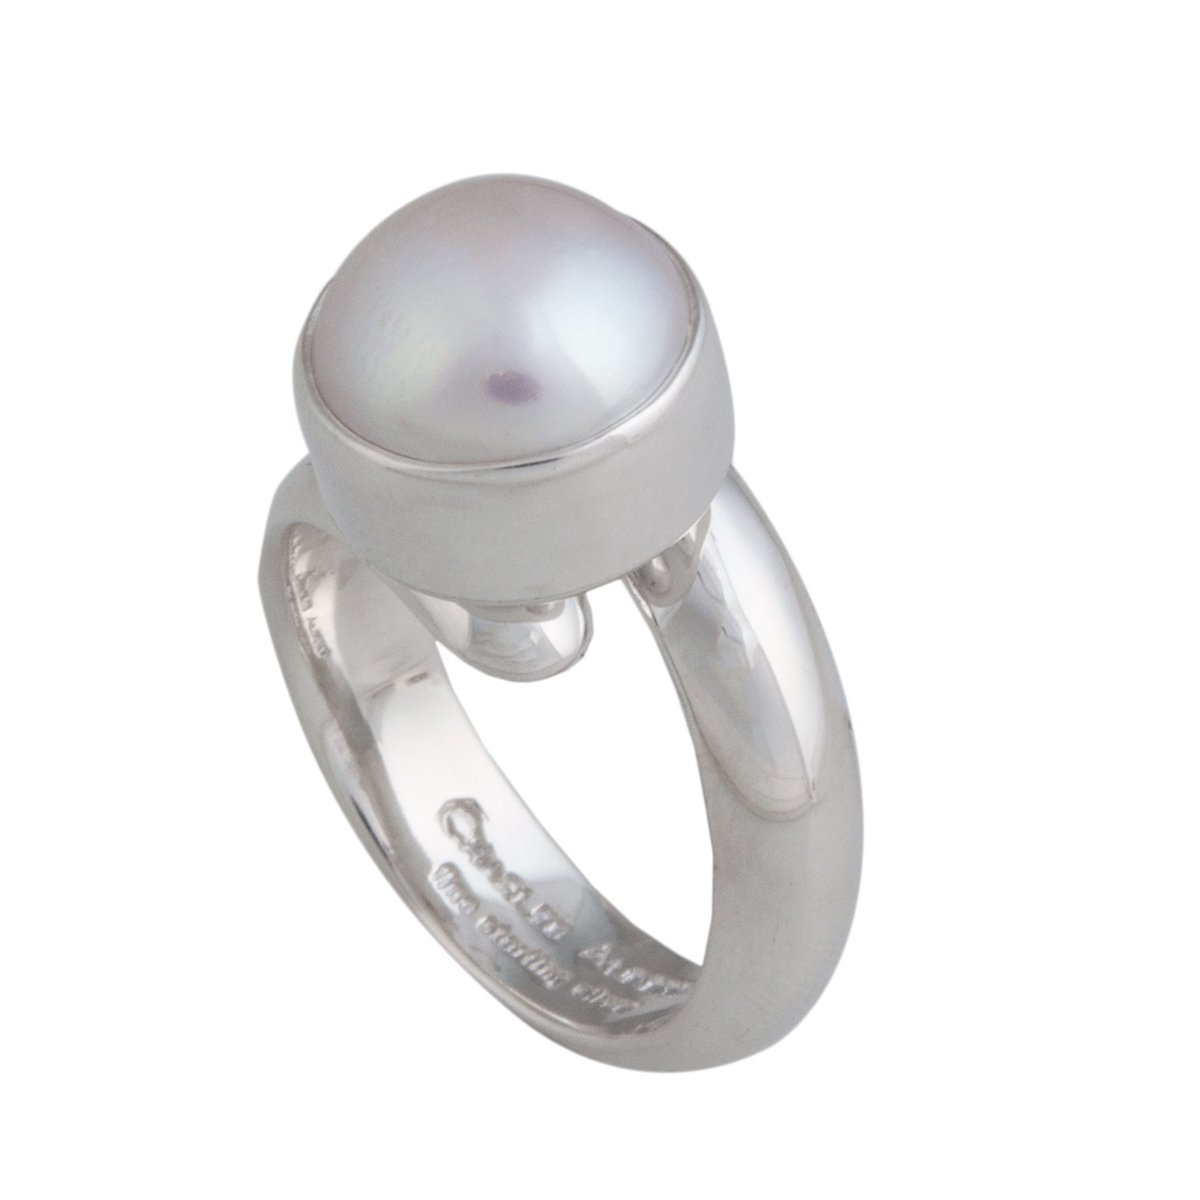 Buy MORIE GEMS Sachcha Moti Original Moti Pearl Ring Weight 7.25 Ratti  Copper tamba Coated Panch dhatu Adjustable Ring for Men and Women at  Amazon.in